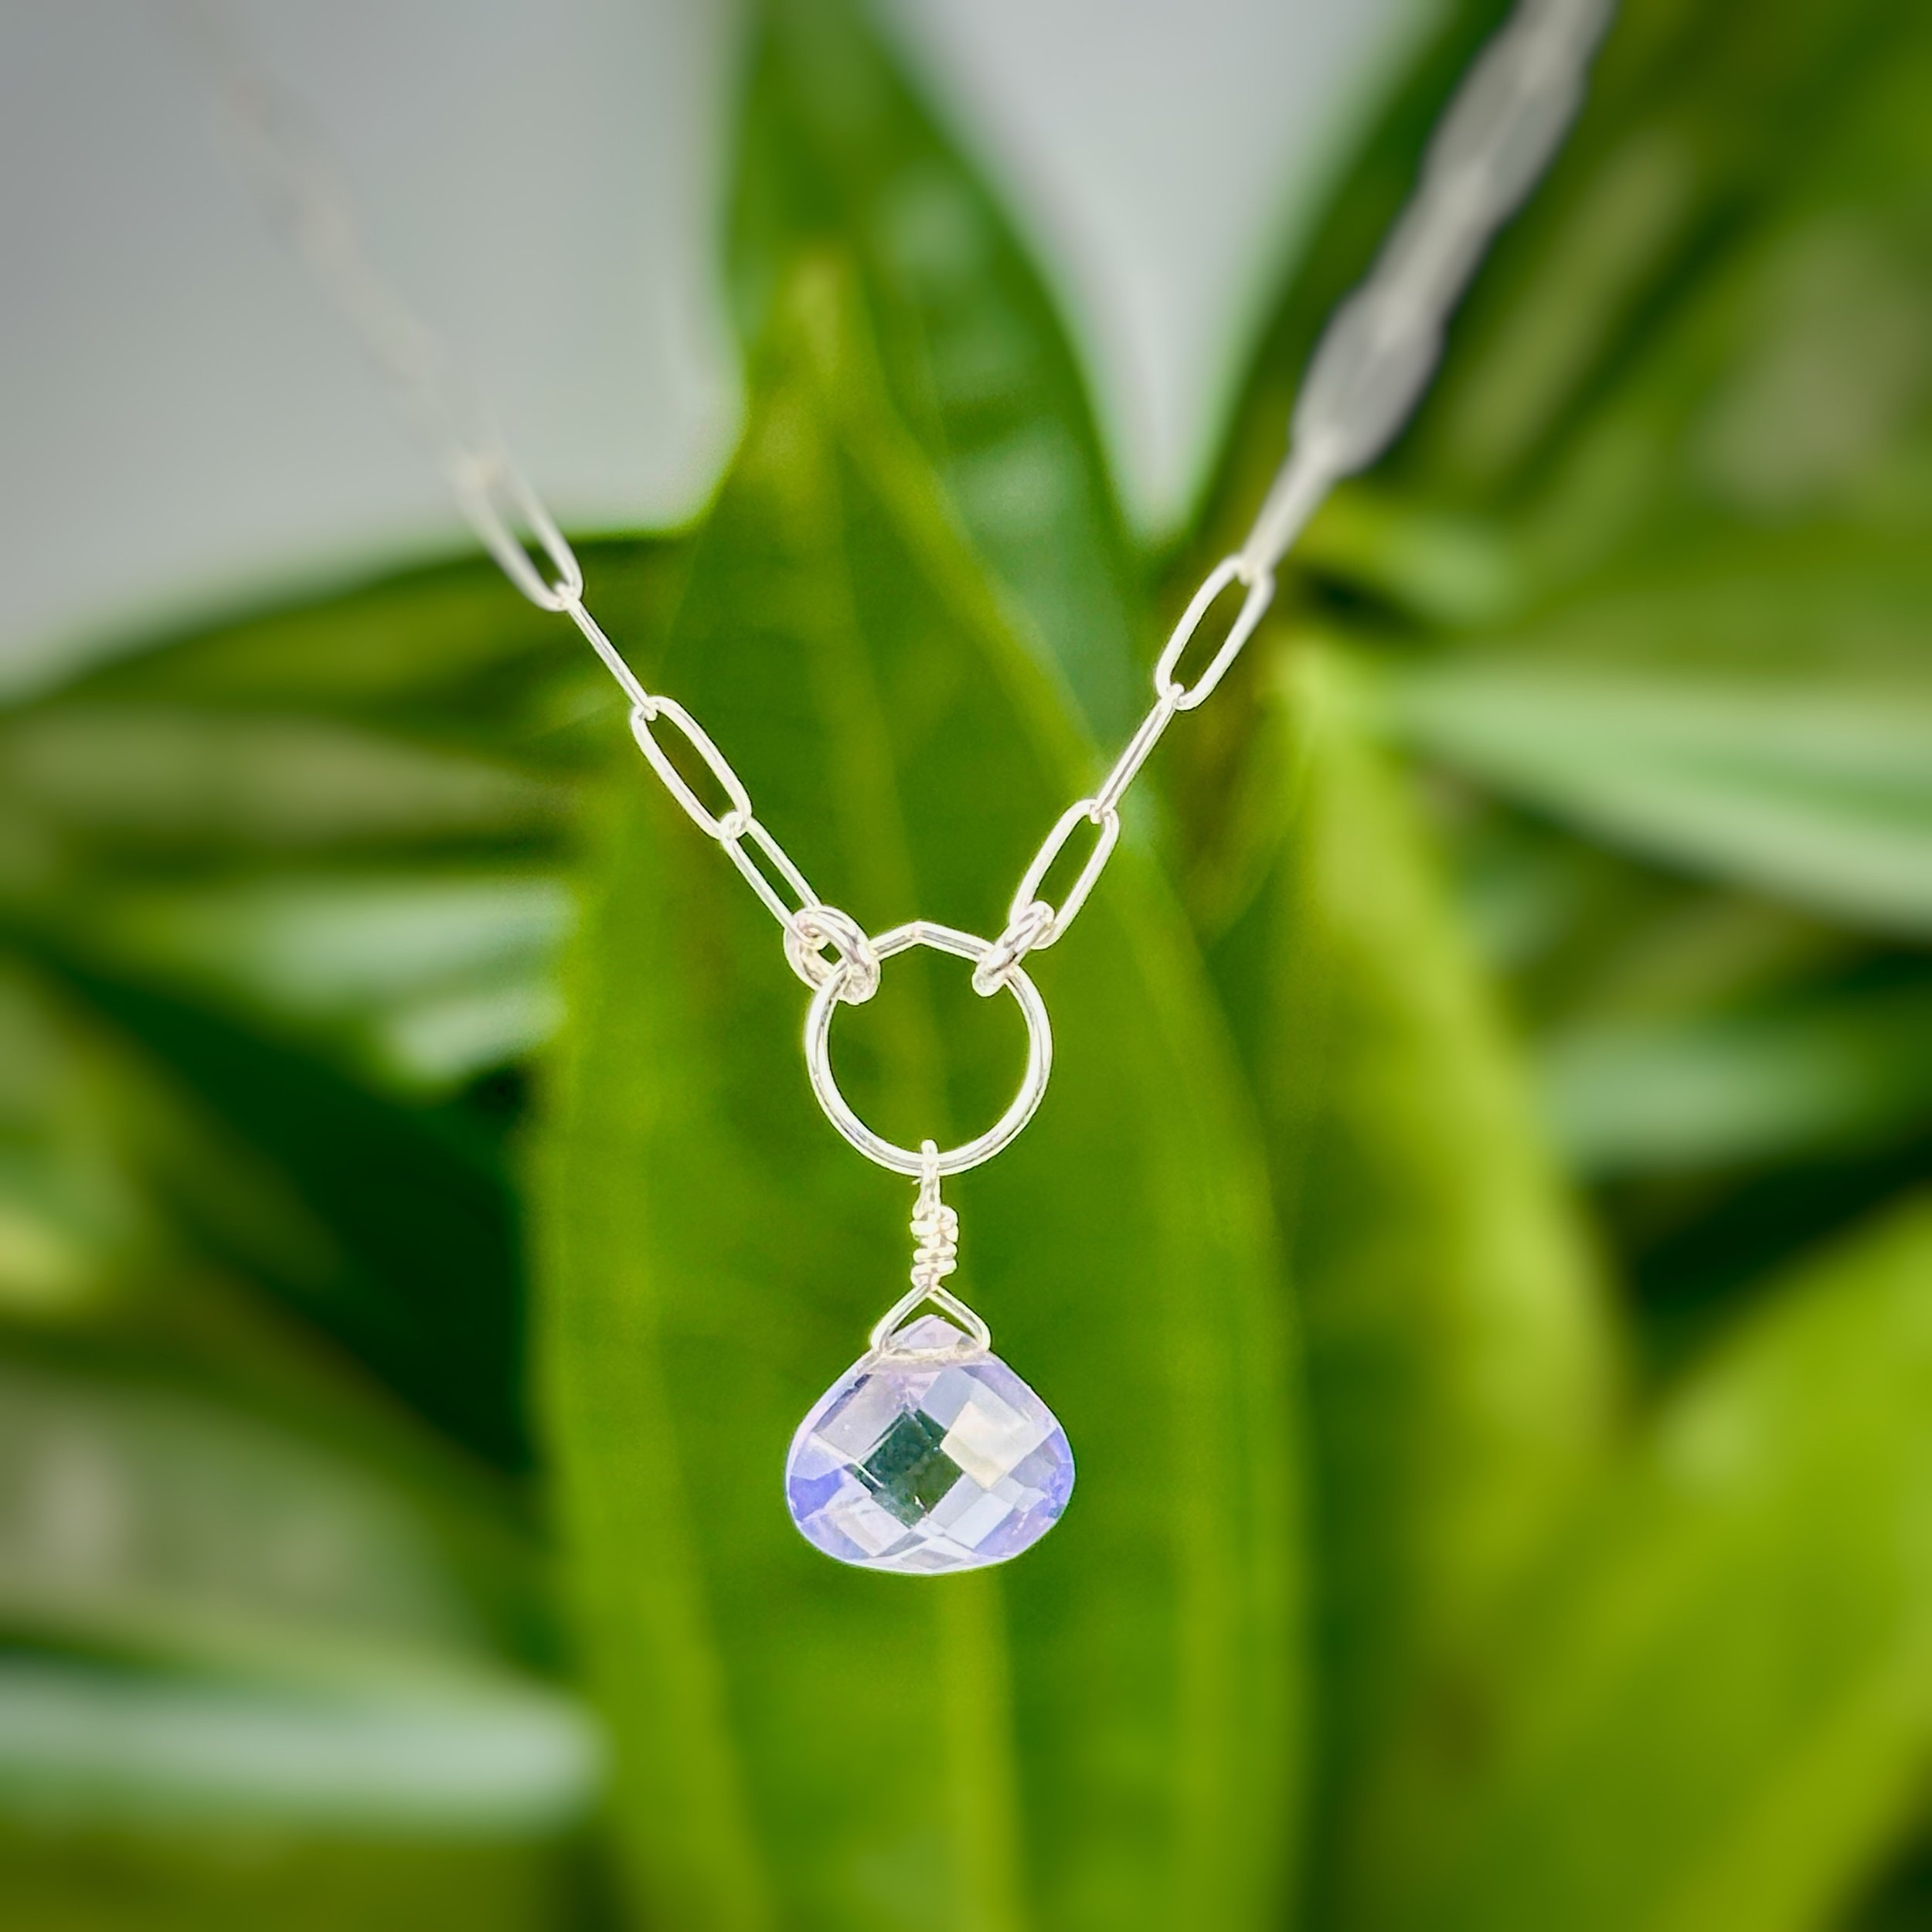 🌸The Peony necklace! BRAND NEW!

This little beauty centerpiece is blue iolite, which really looks more lavender doesn't it? Paired with sterling silver to pop the brightness, this necklace is delicate and simple for a simple everyday necklace or ne